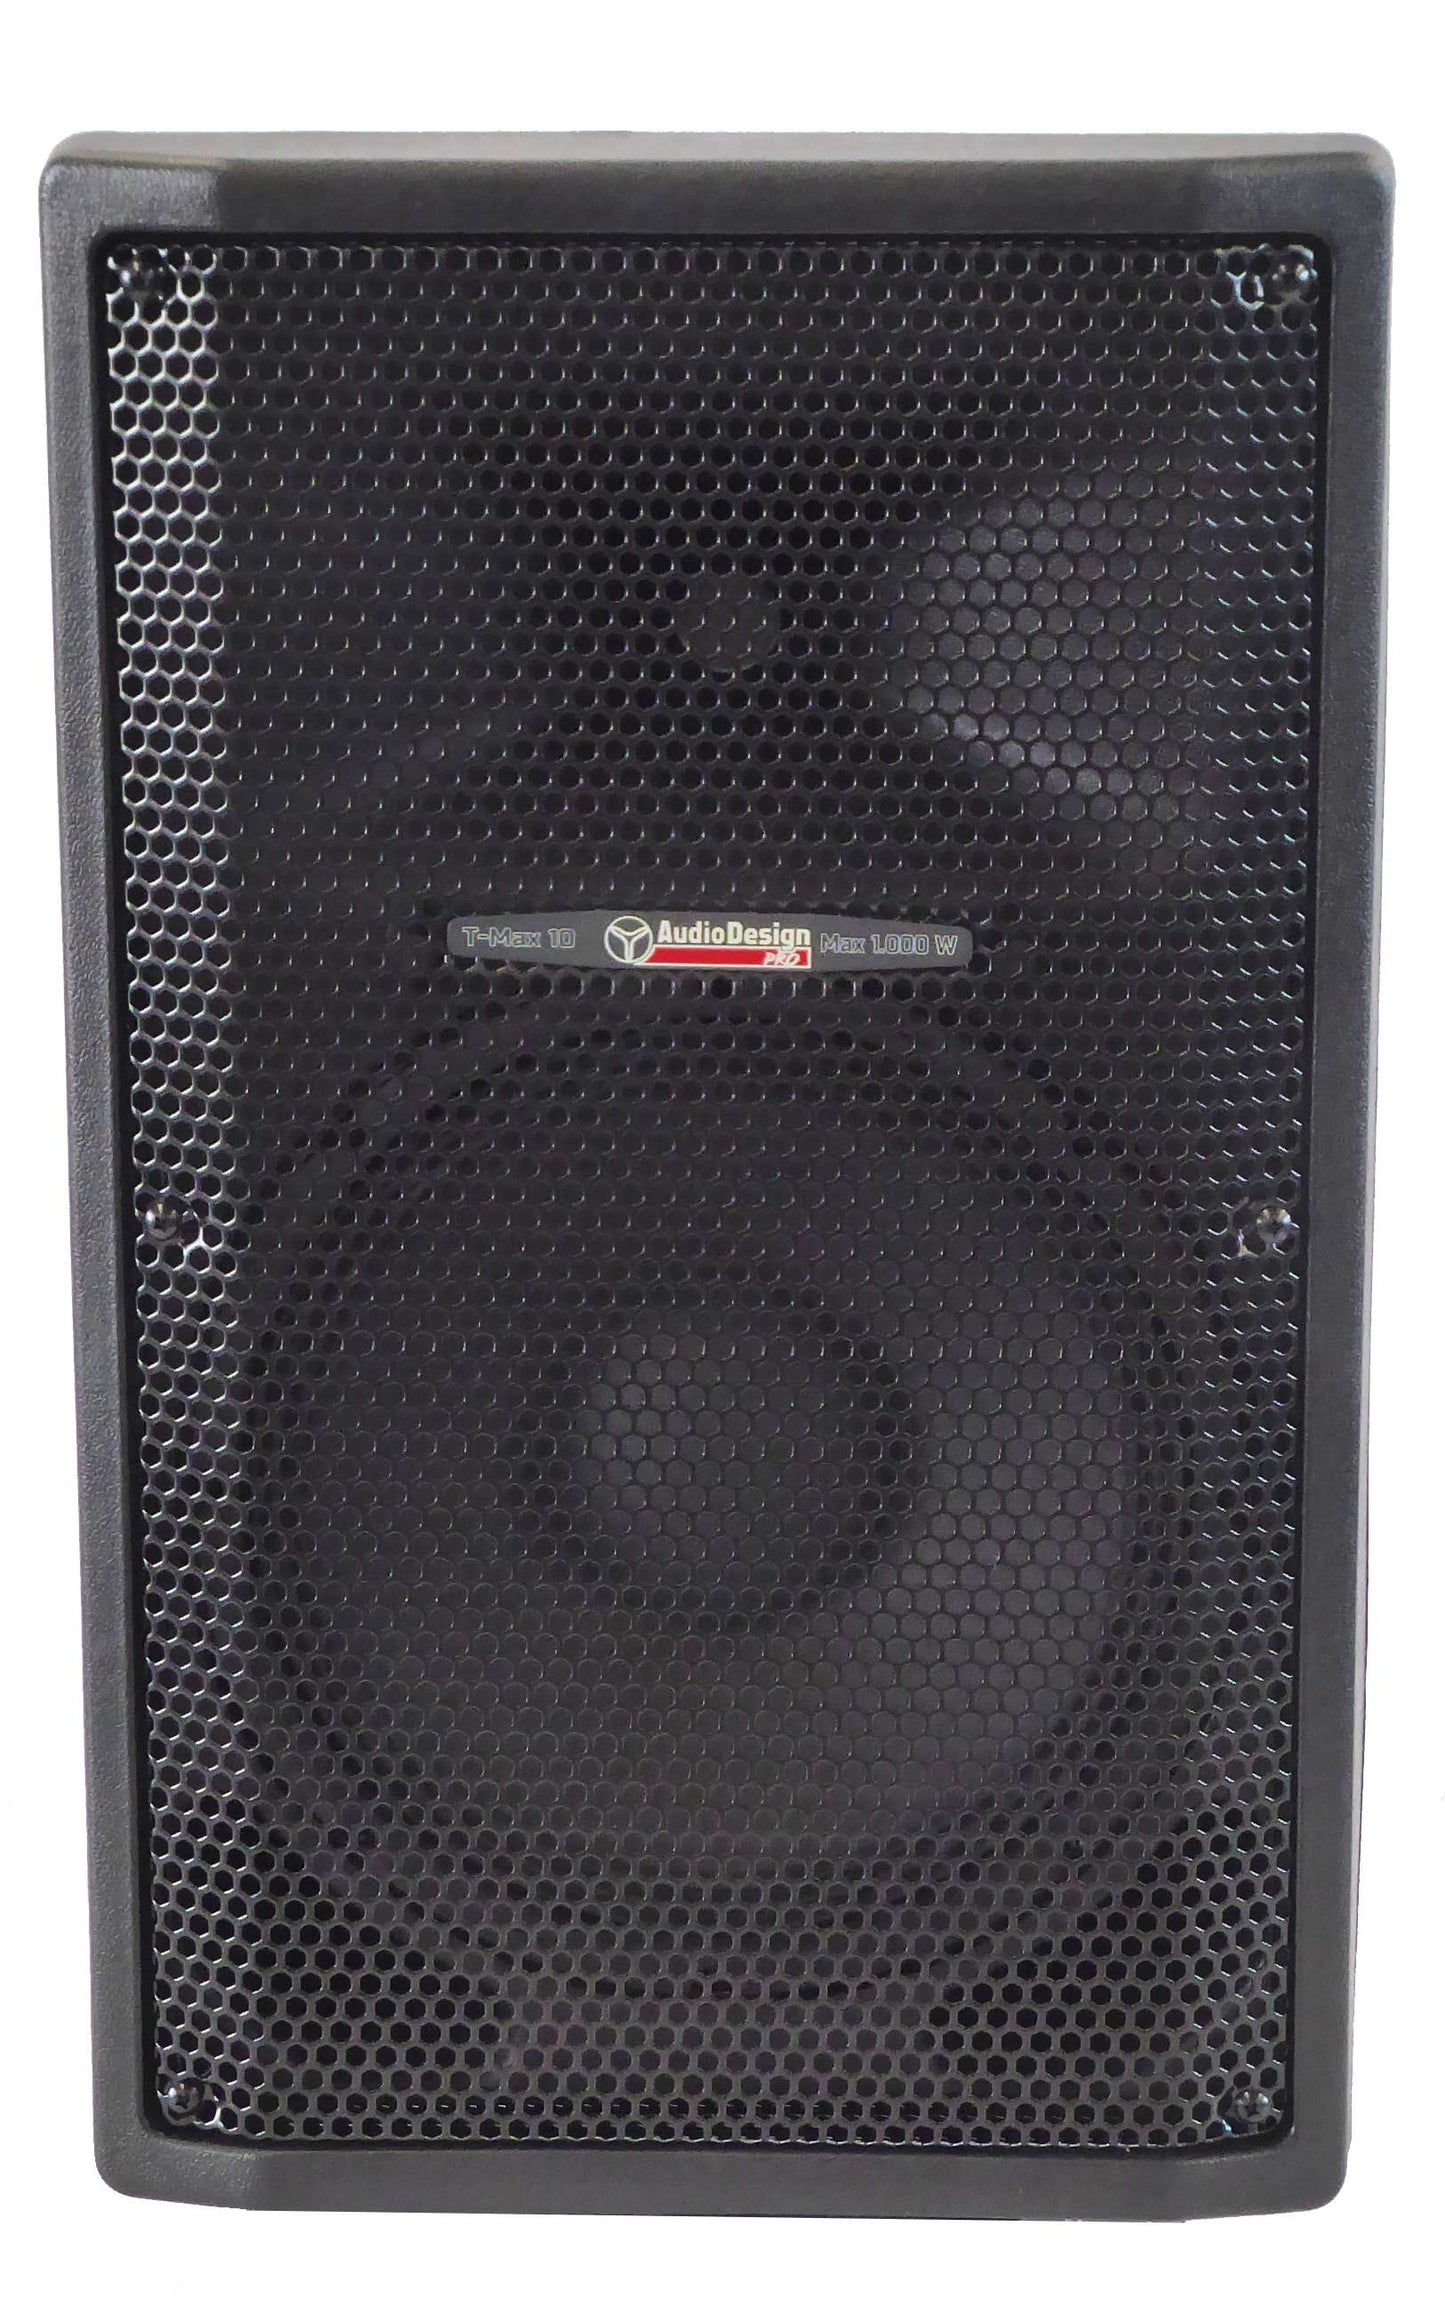 AudioDesign Pro TMAX10 Professional 2-way active speaker, cabinet with 250 mm woofer and 1000W power